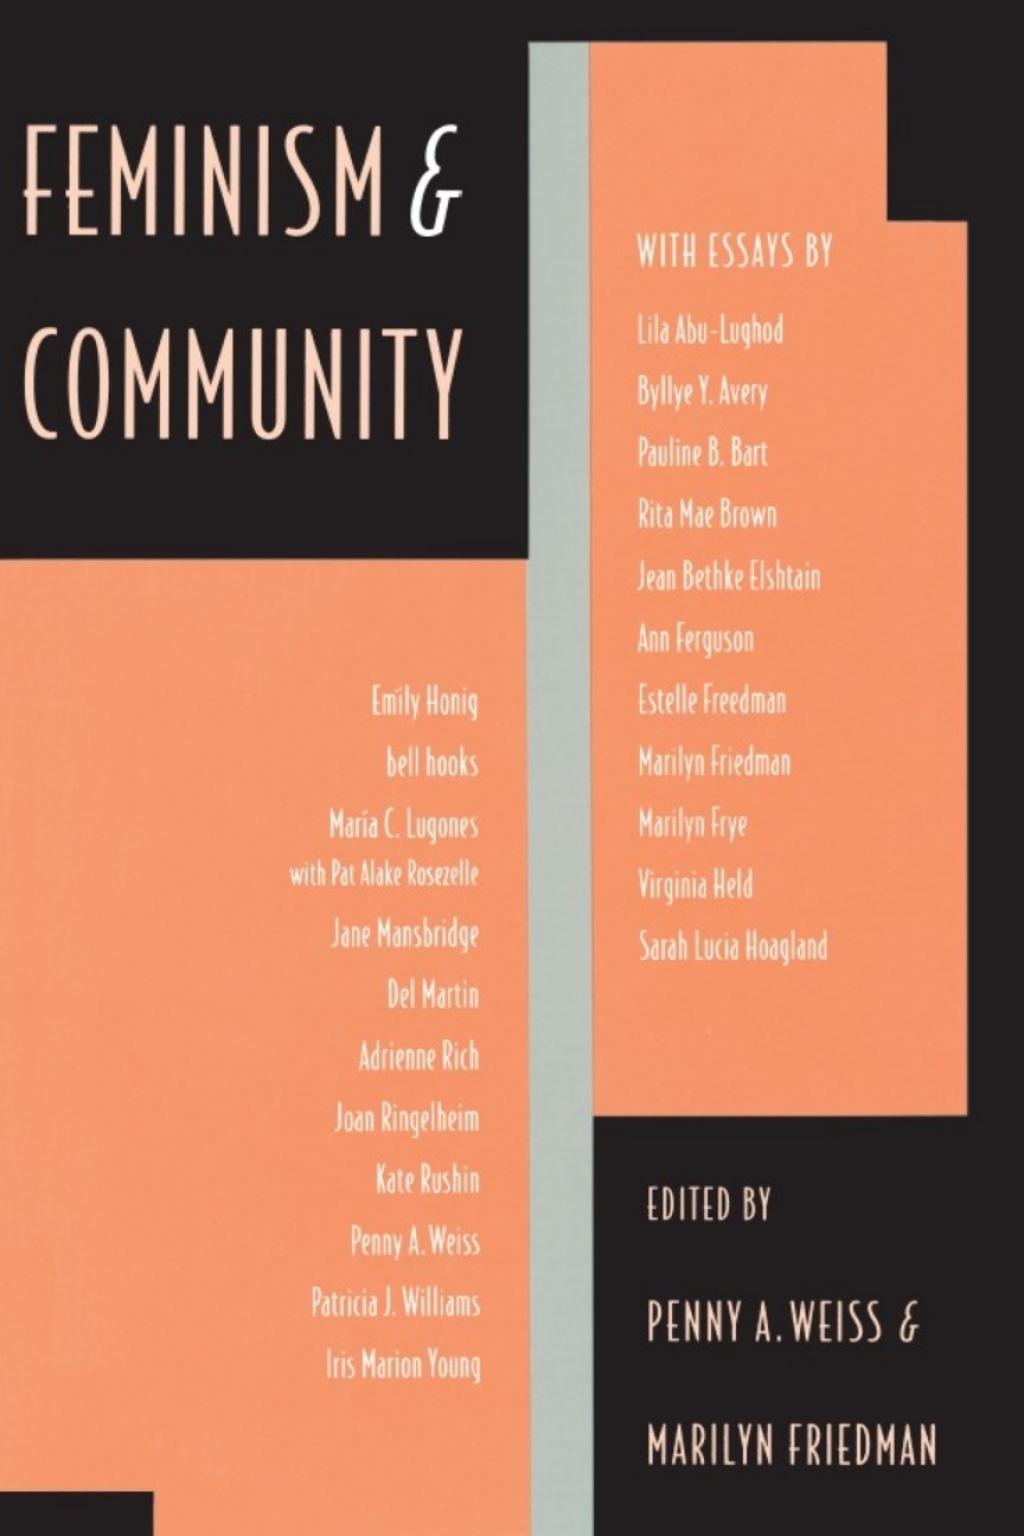 Feminism and Community (eBook) - Penny Weiss,